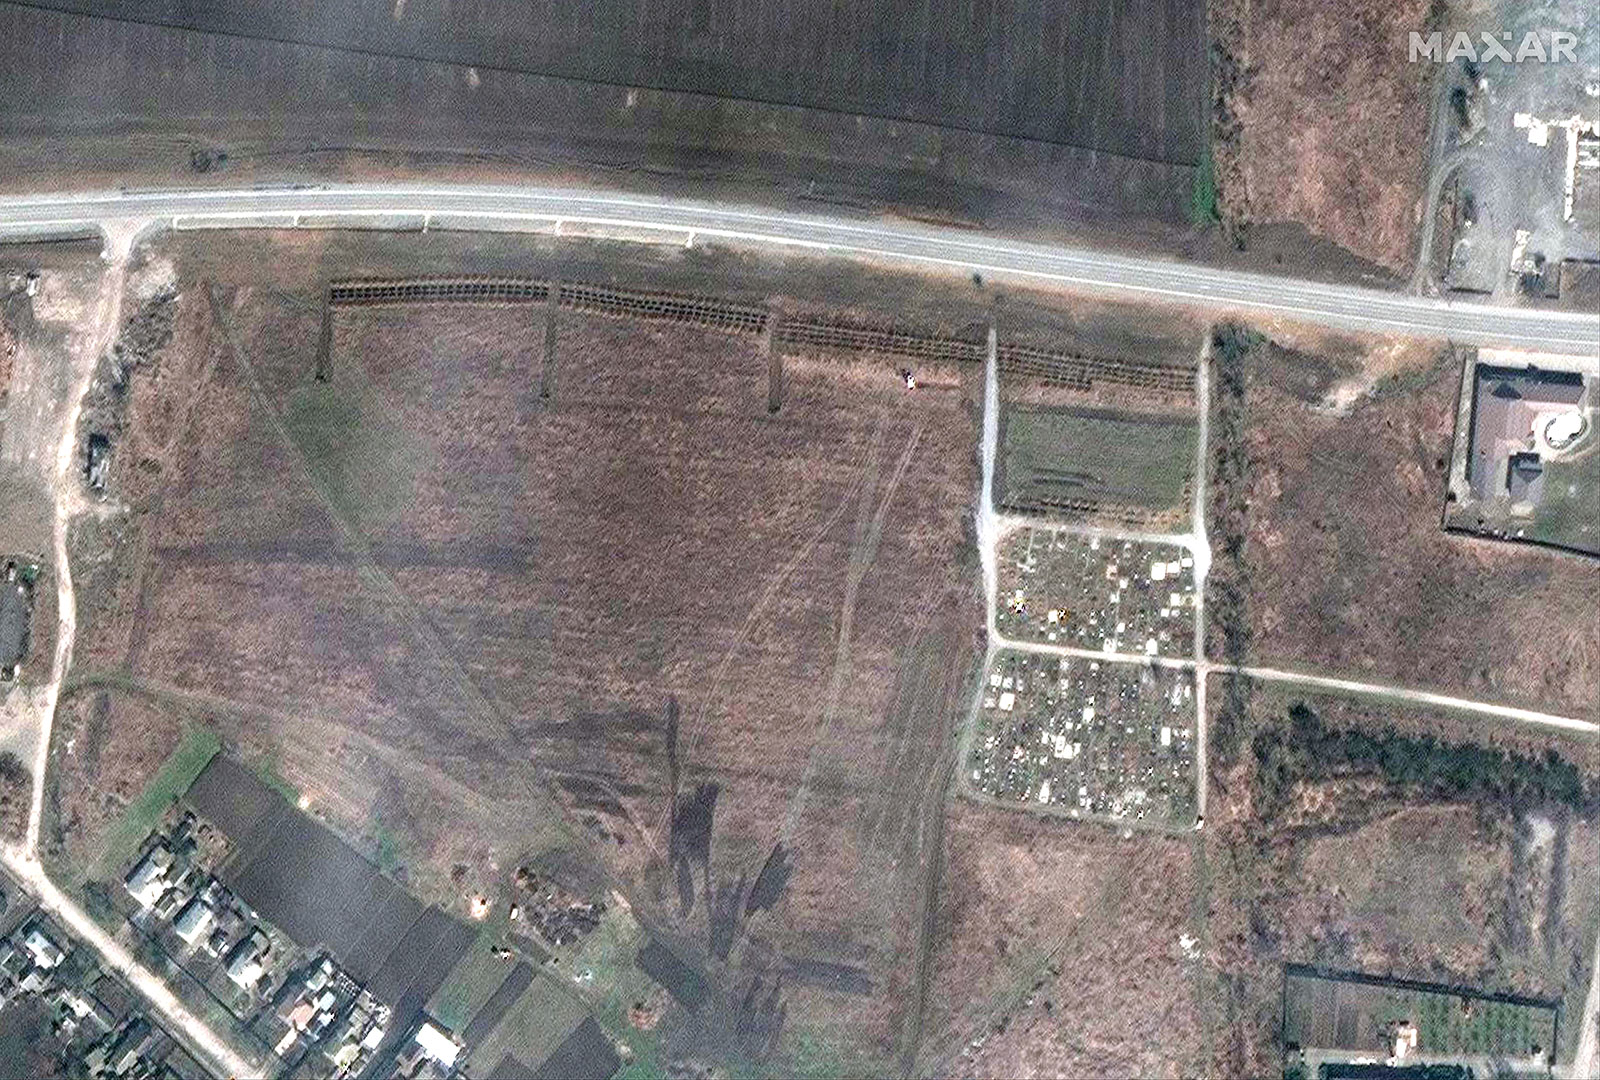 Ukrainian officials and satellite images point to evidence of mass graves outside of Mariupol